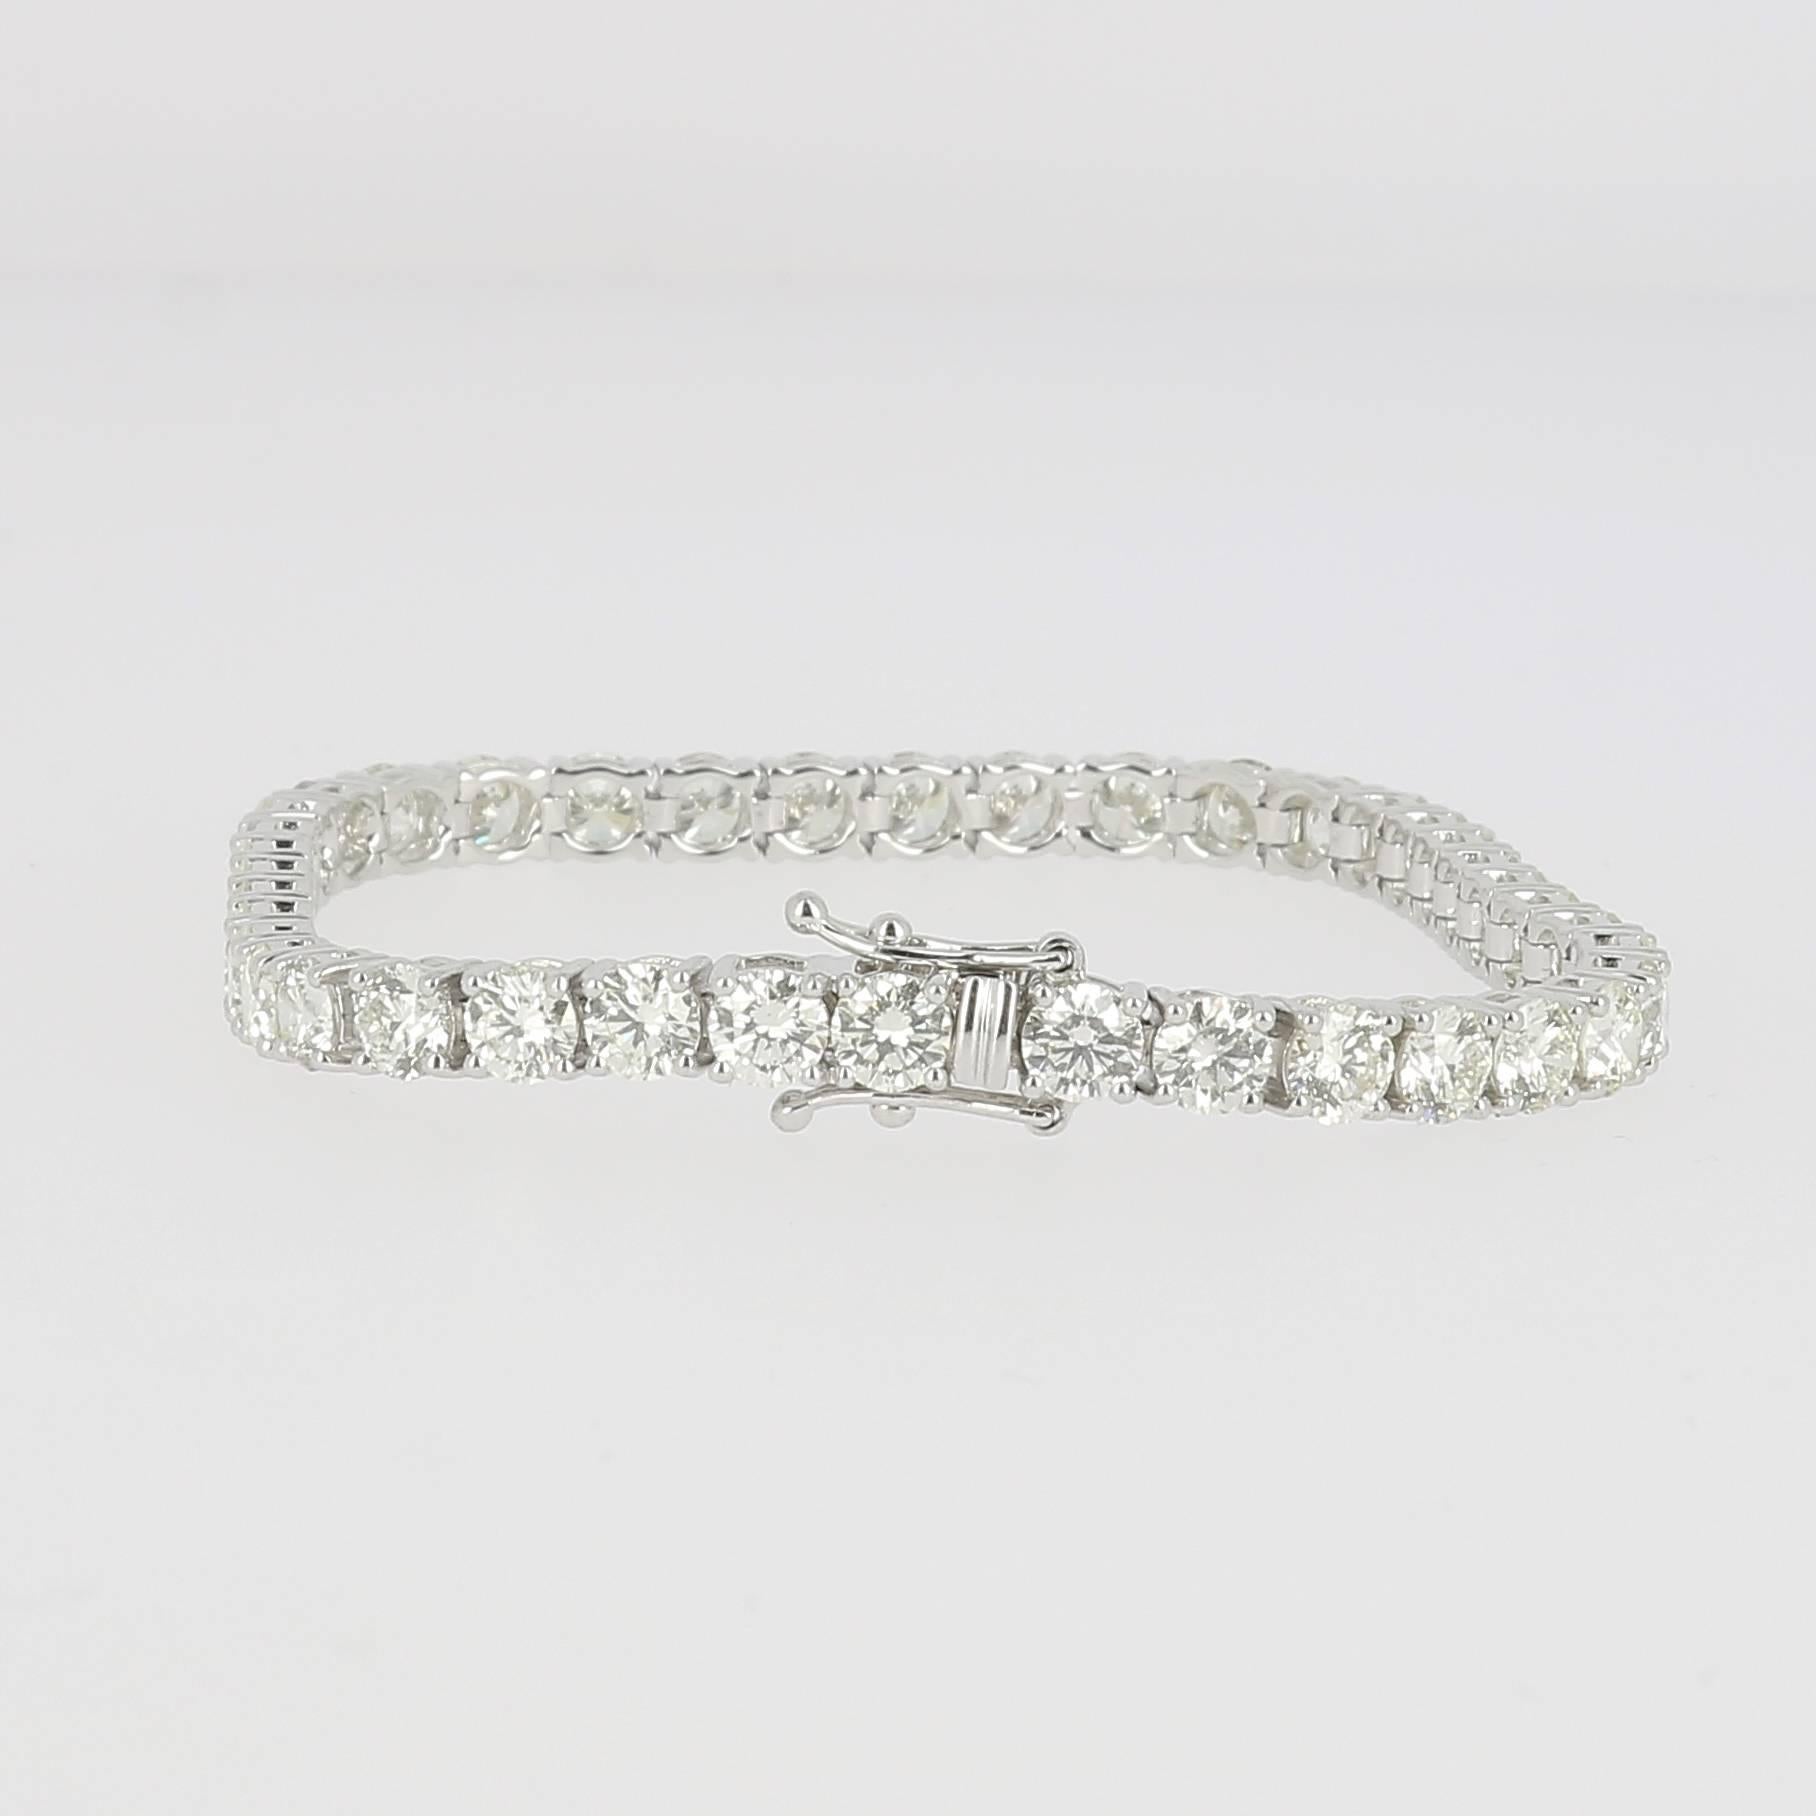 Beautiful And Classic Tennis Bracelet.
The bracelet is 18K White Gold.
There are 12.44 Carats in Diamonds.
There are 40 Round Diamonds .
The bracelet is inches 7,5 long (19 cm).
The bracelet weighs 15.83 grams.
Feel free to ask if you need a special